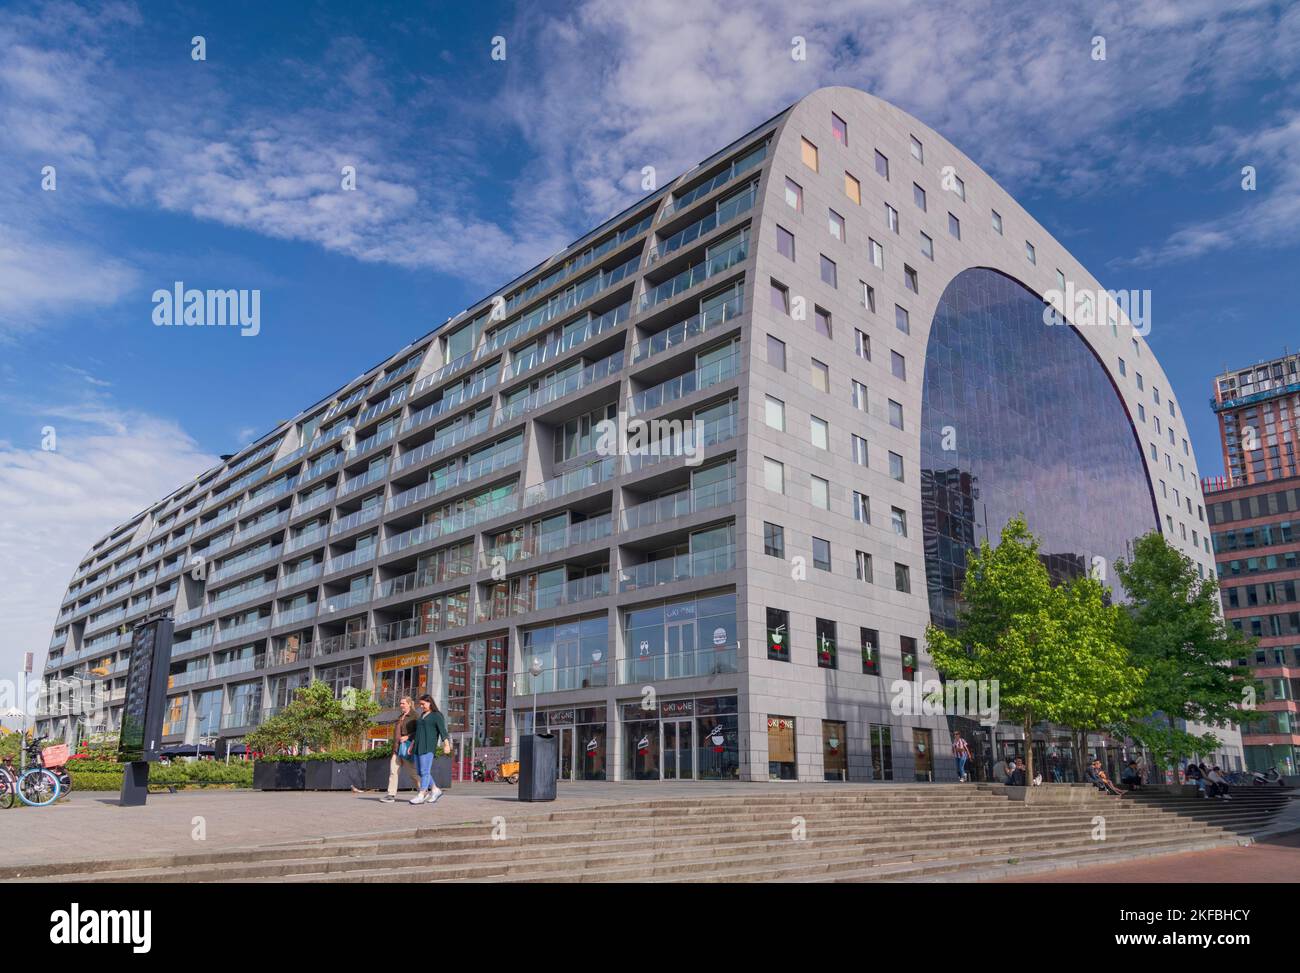 Netherlands, Rotterdam, The Markthal or Market Hall which is a residential and office building with a market hall underneath, west facade. Stock Photo